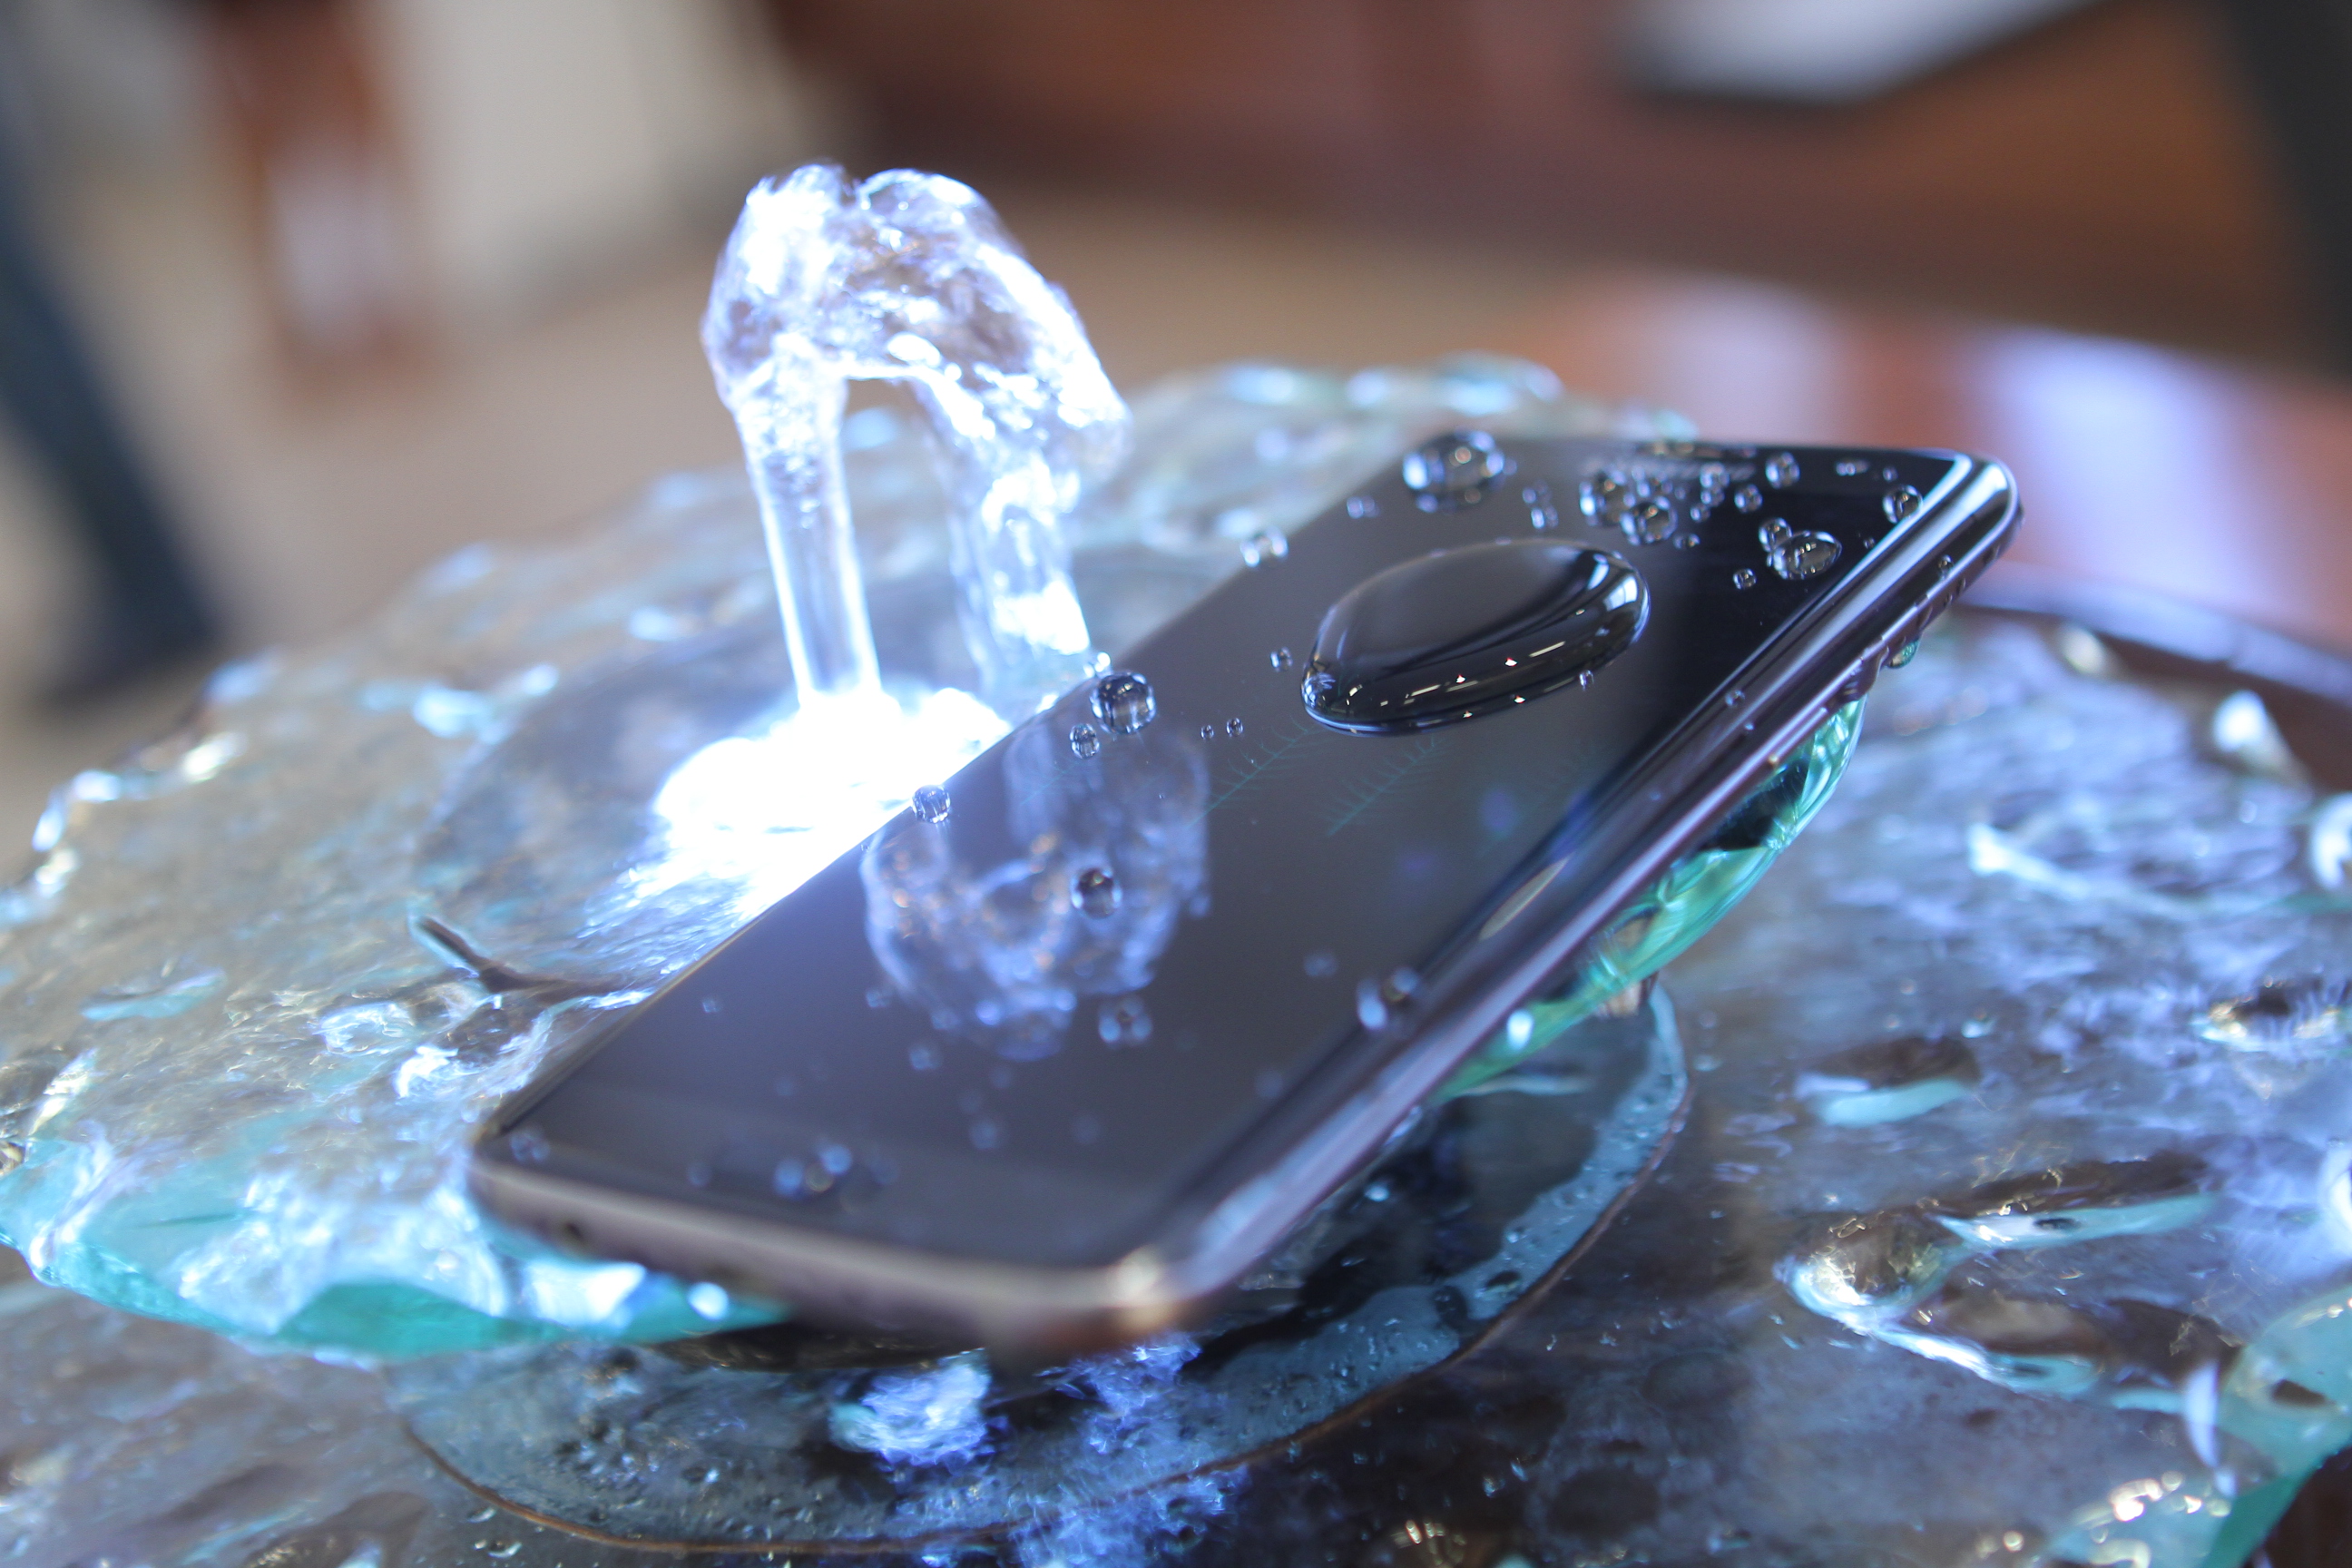 Samsung showcases the waterproof capability of its Galaxy S7 smartphone.